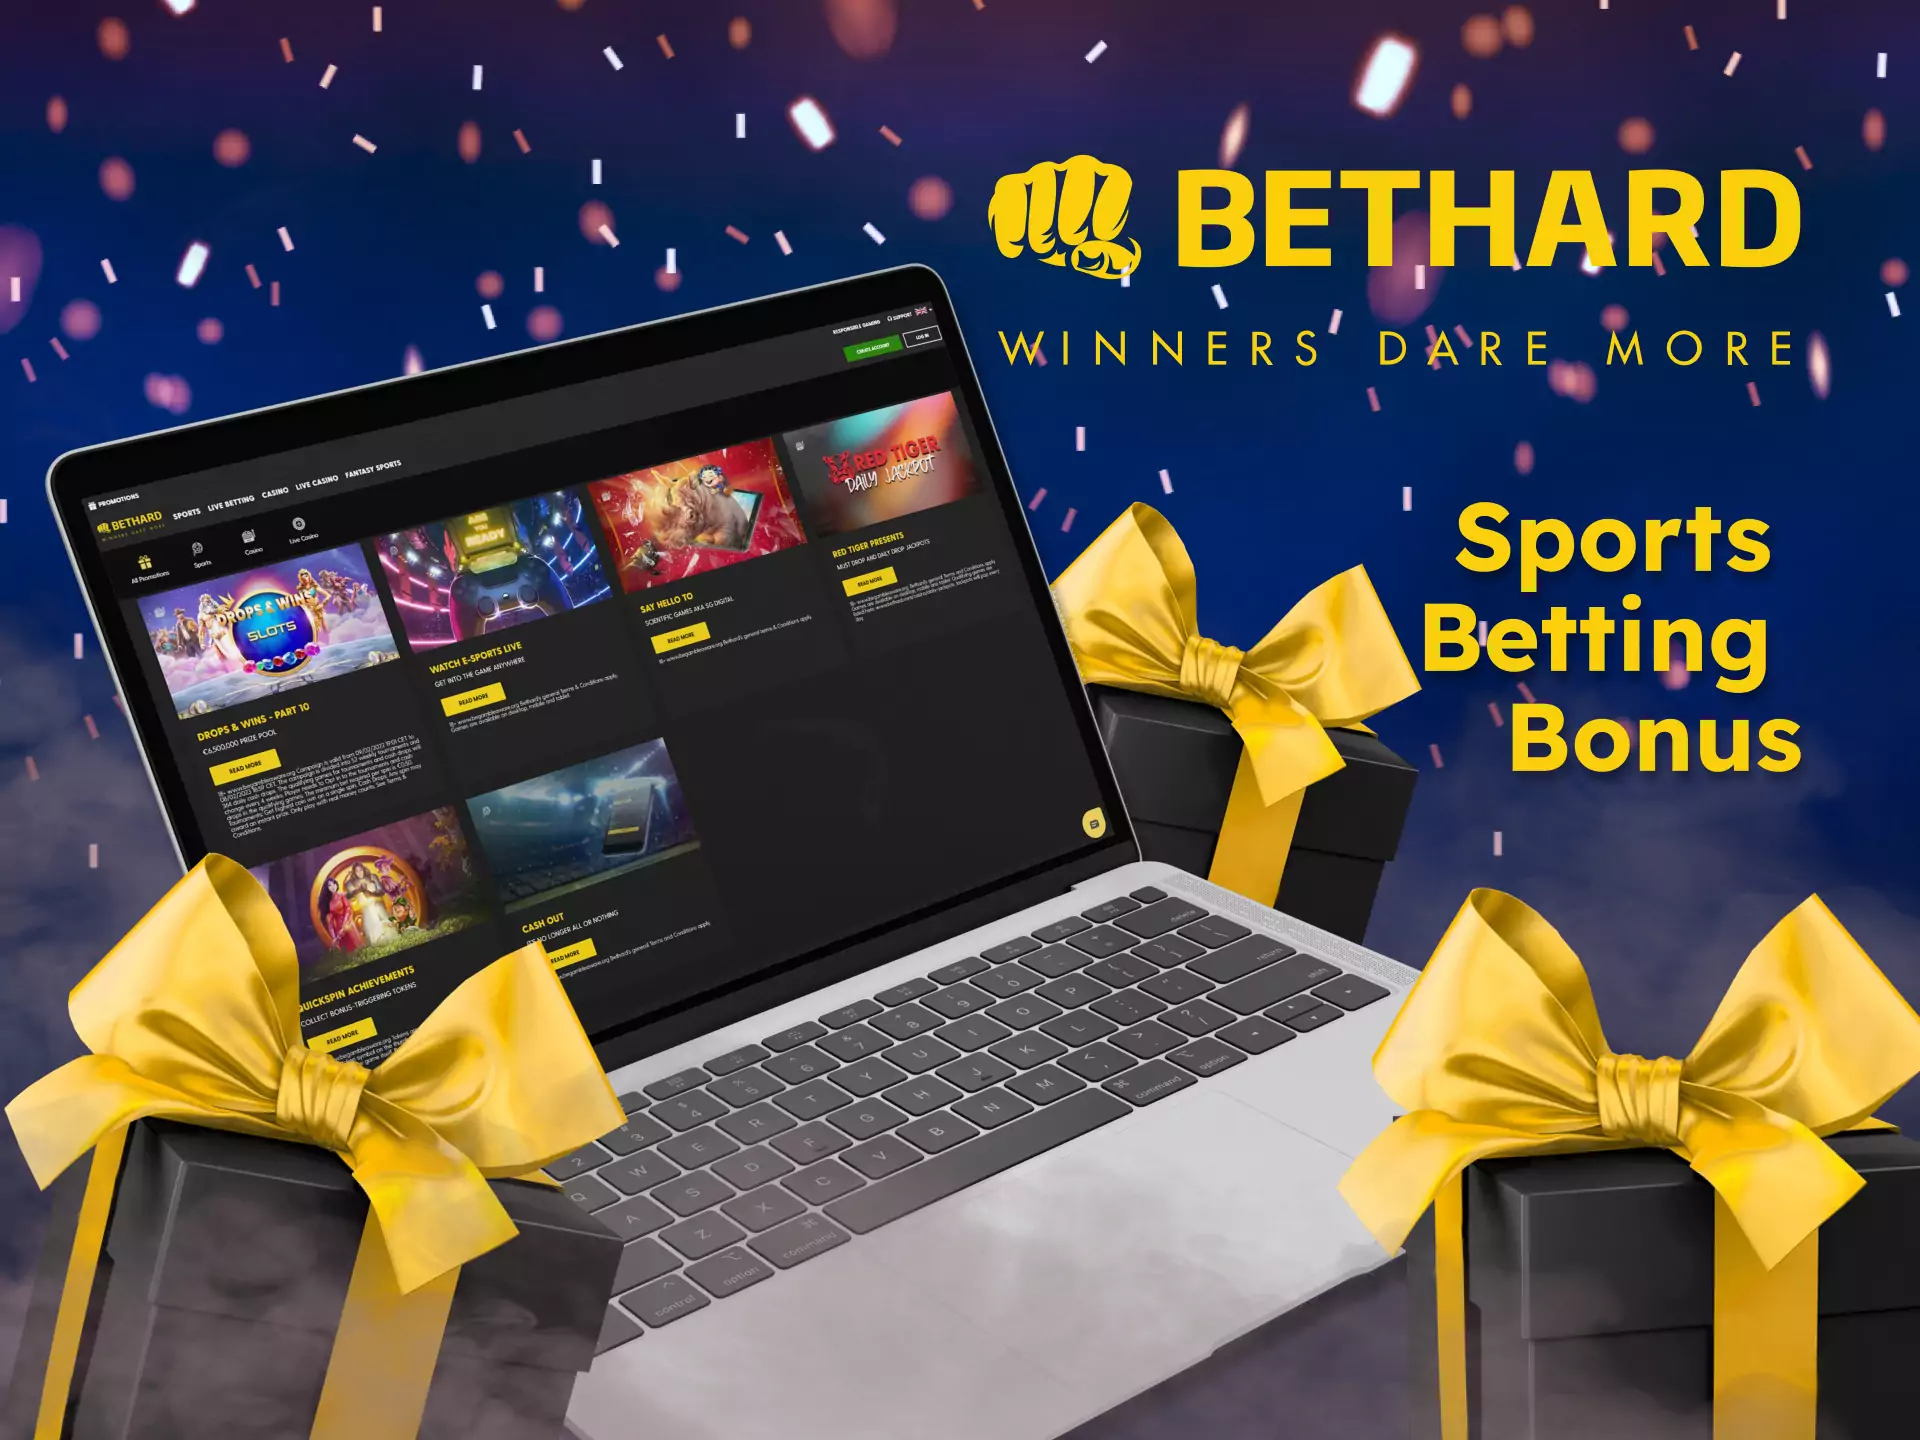 Bethard offers players to try a special bonus for sports betting.